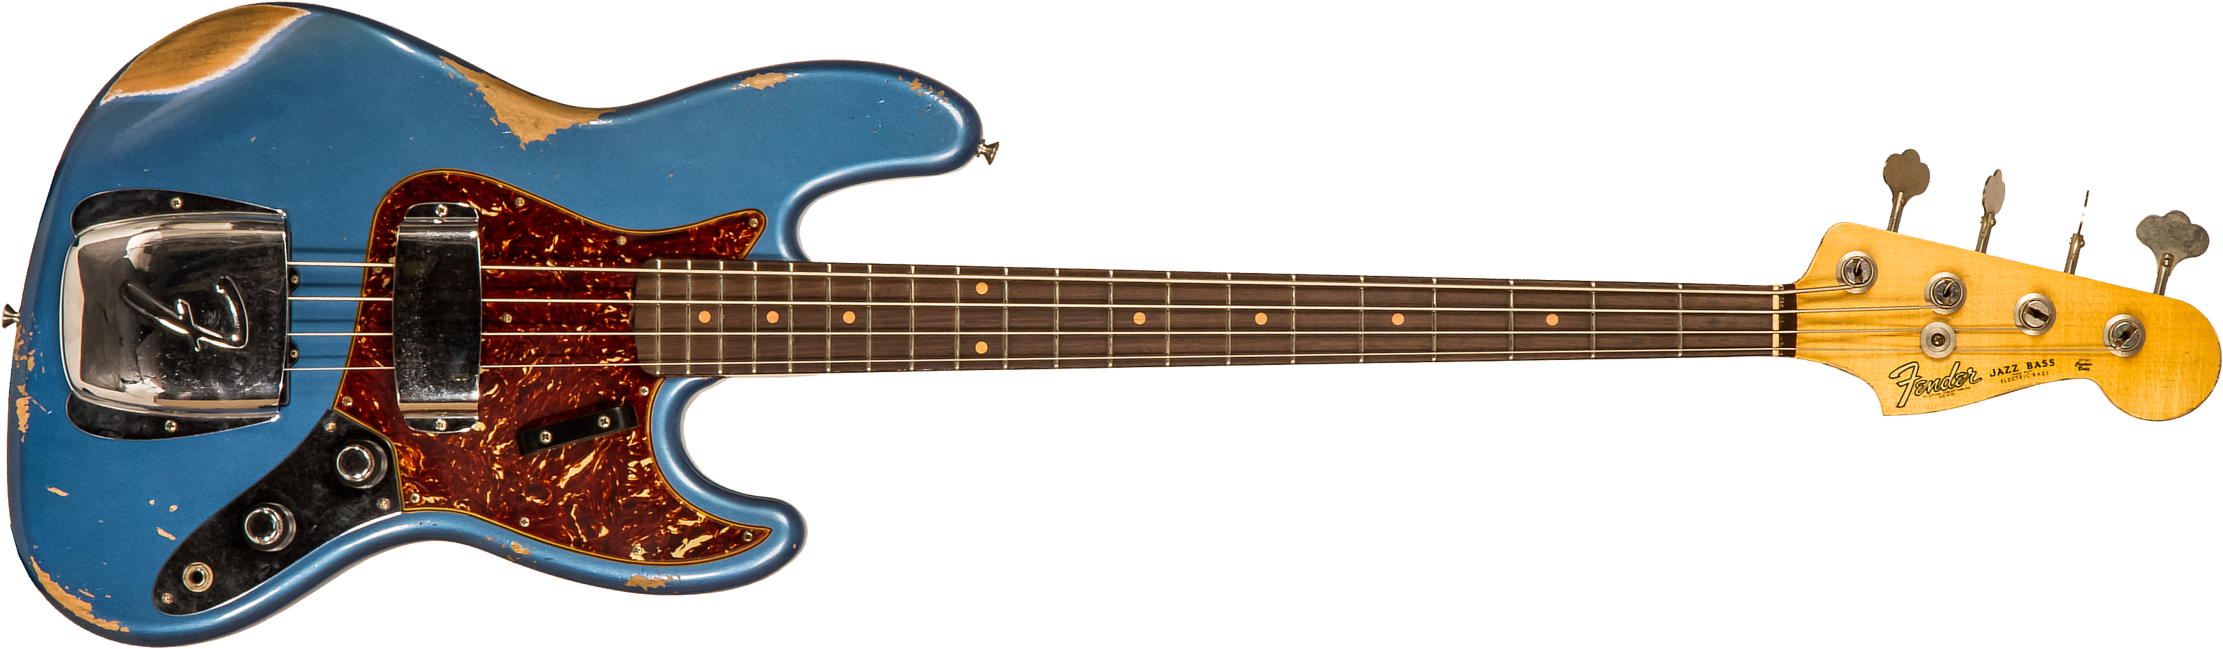 Fender Custom Shop Jazz Bass 1961 Rw #cz556667 - Heavy Relic Lake Placid Blue - Solid body electric bass - Main picture